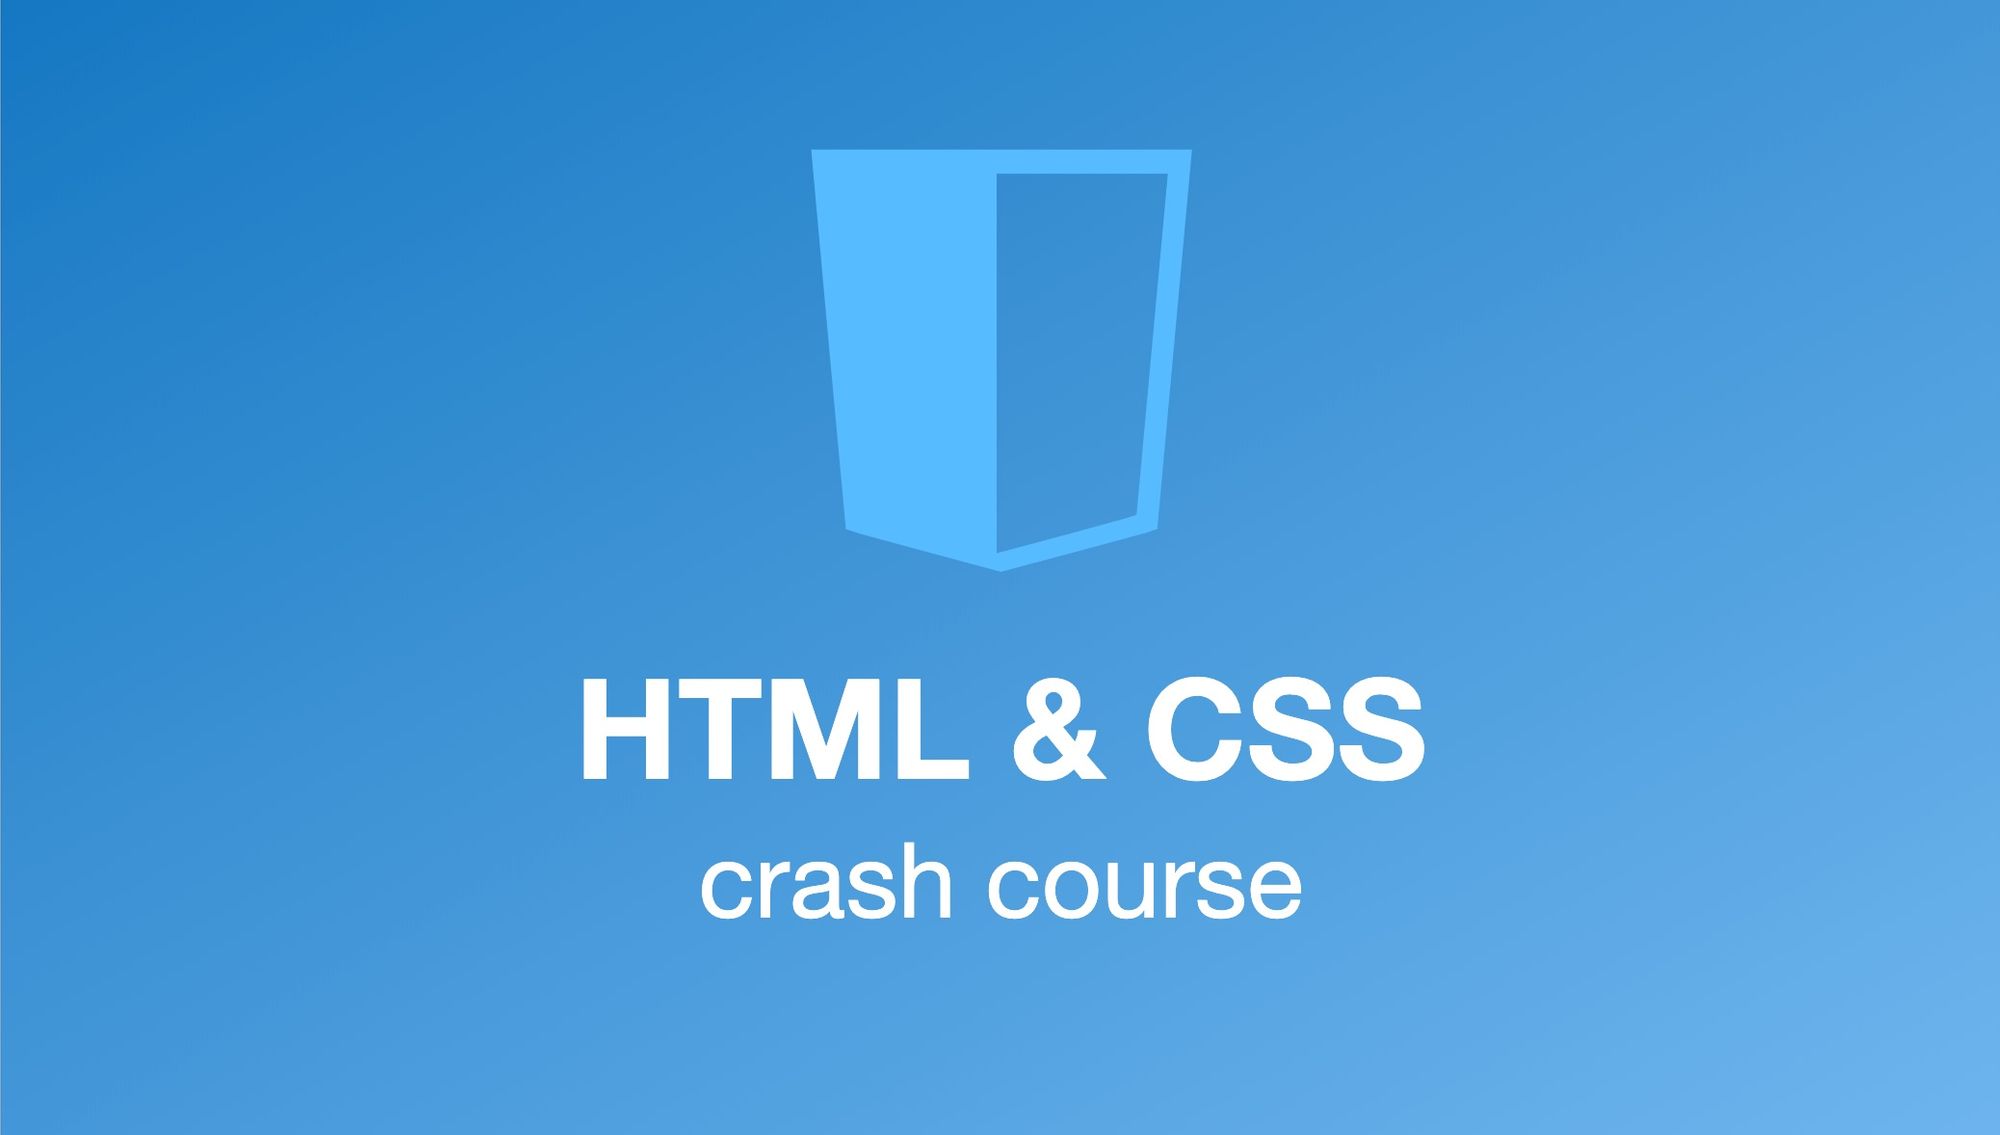 Want to learn to build websites? Try our free HTML & CSS crash course